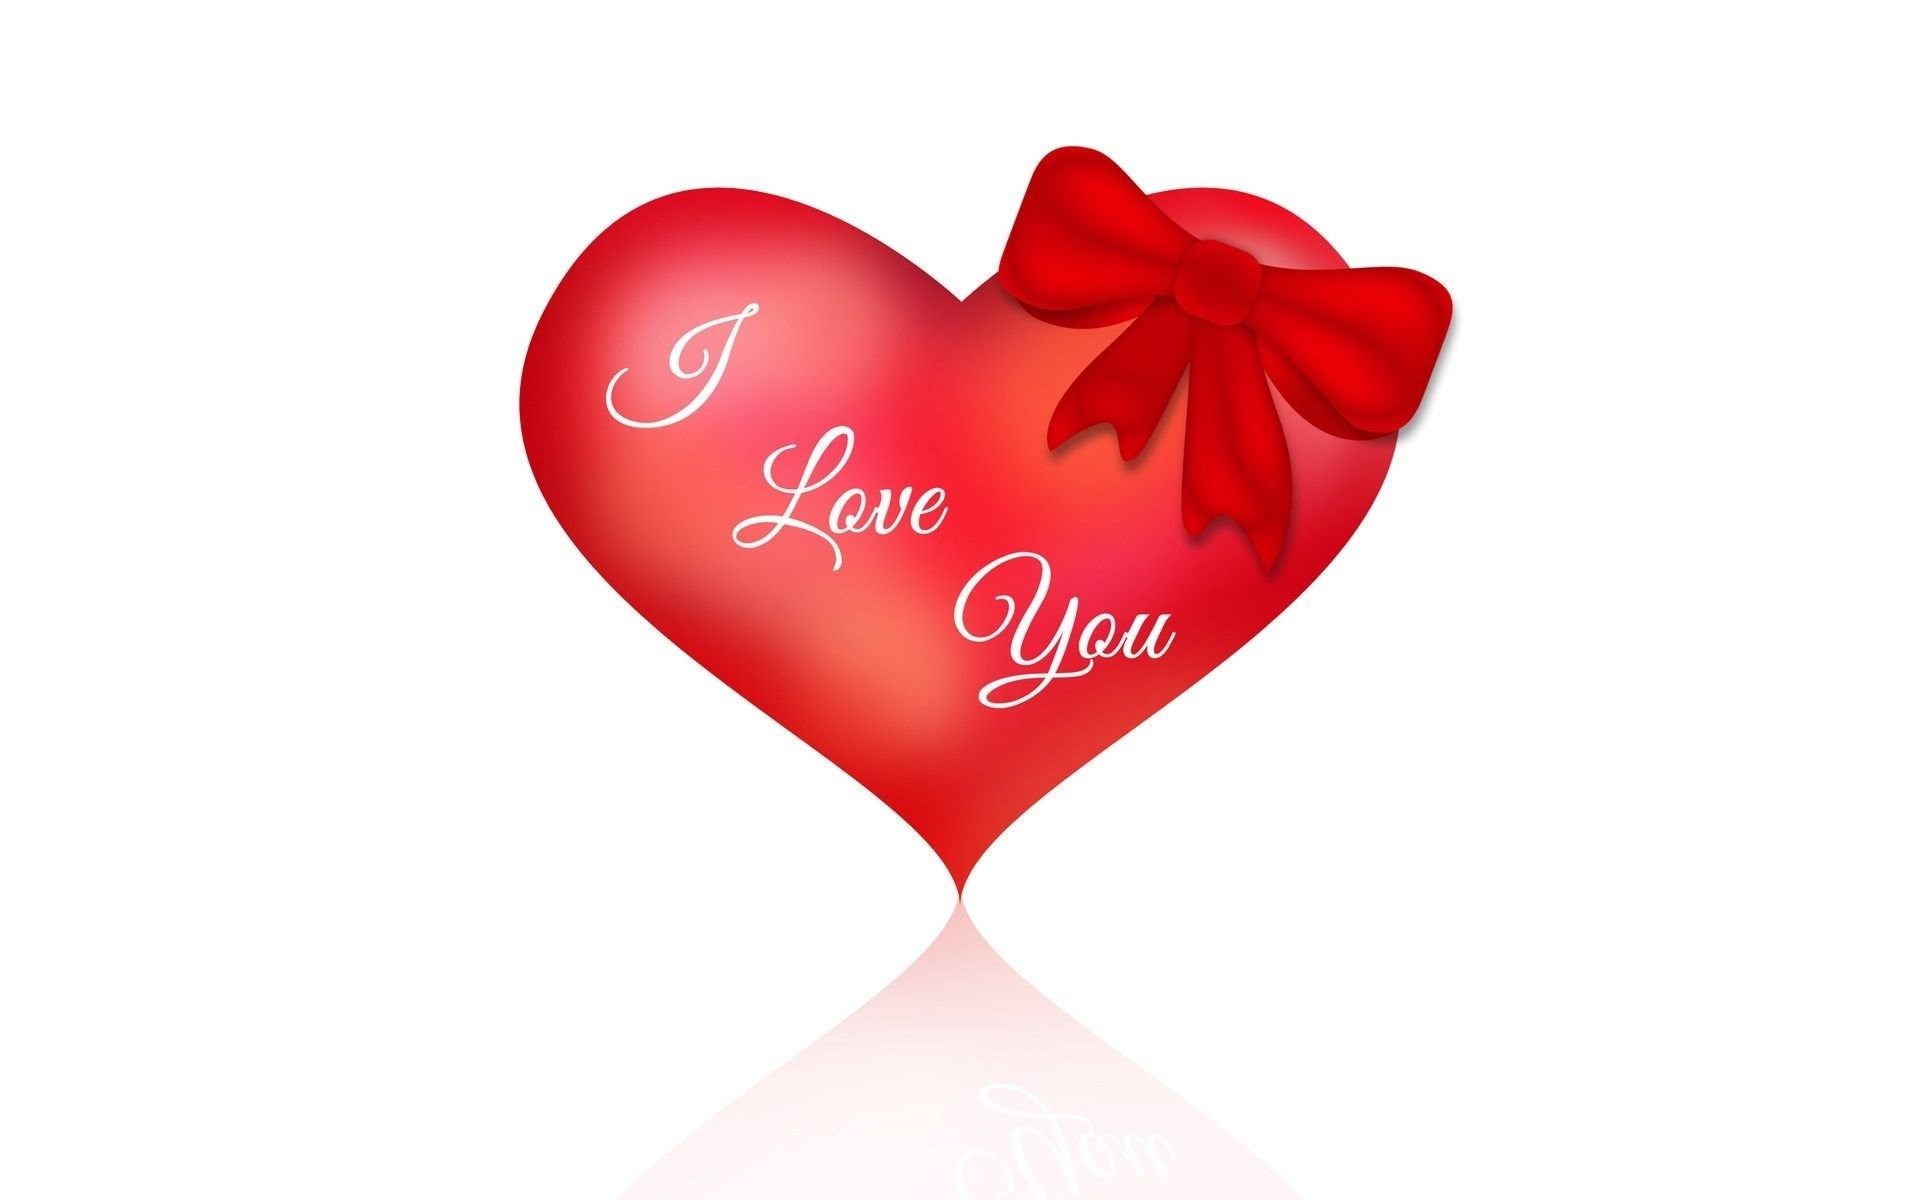 most beautiful i love you images